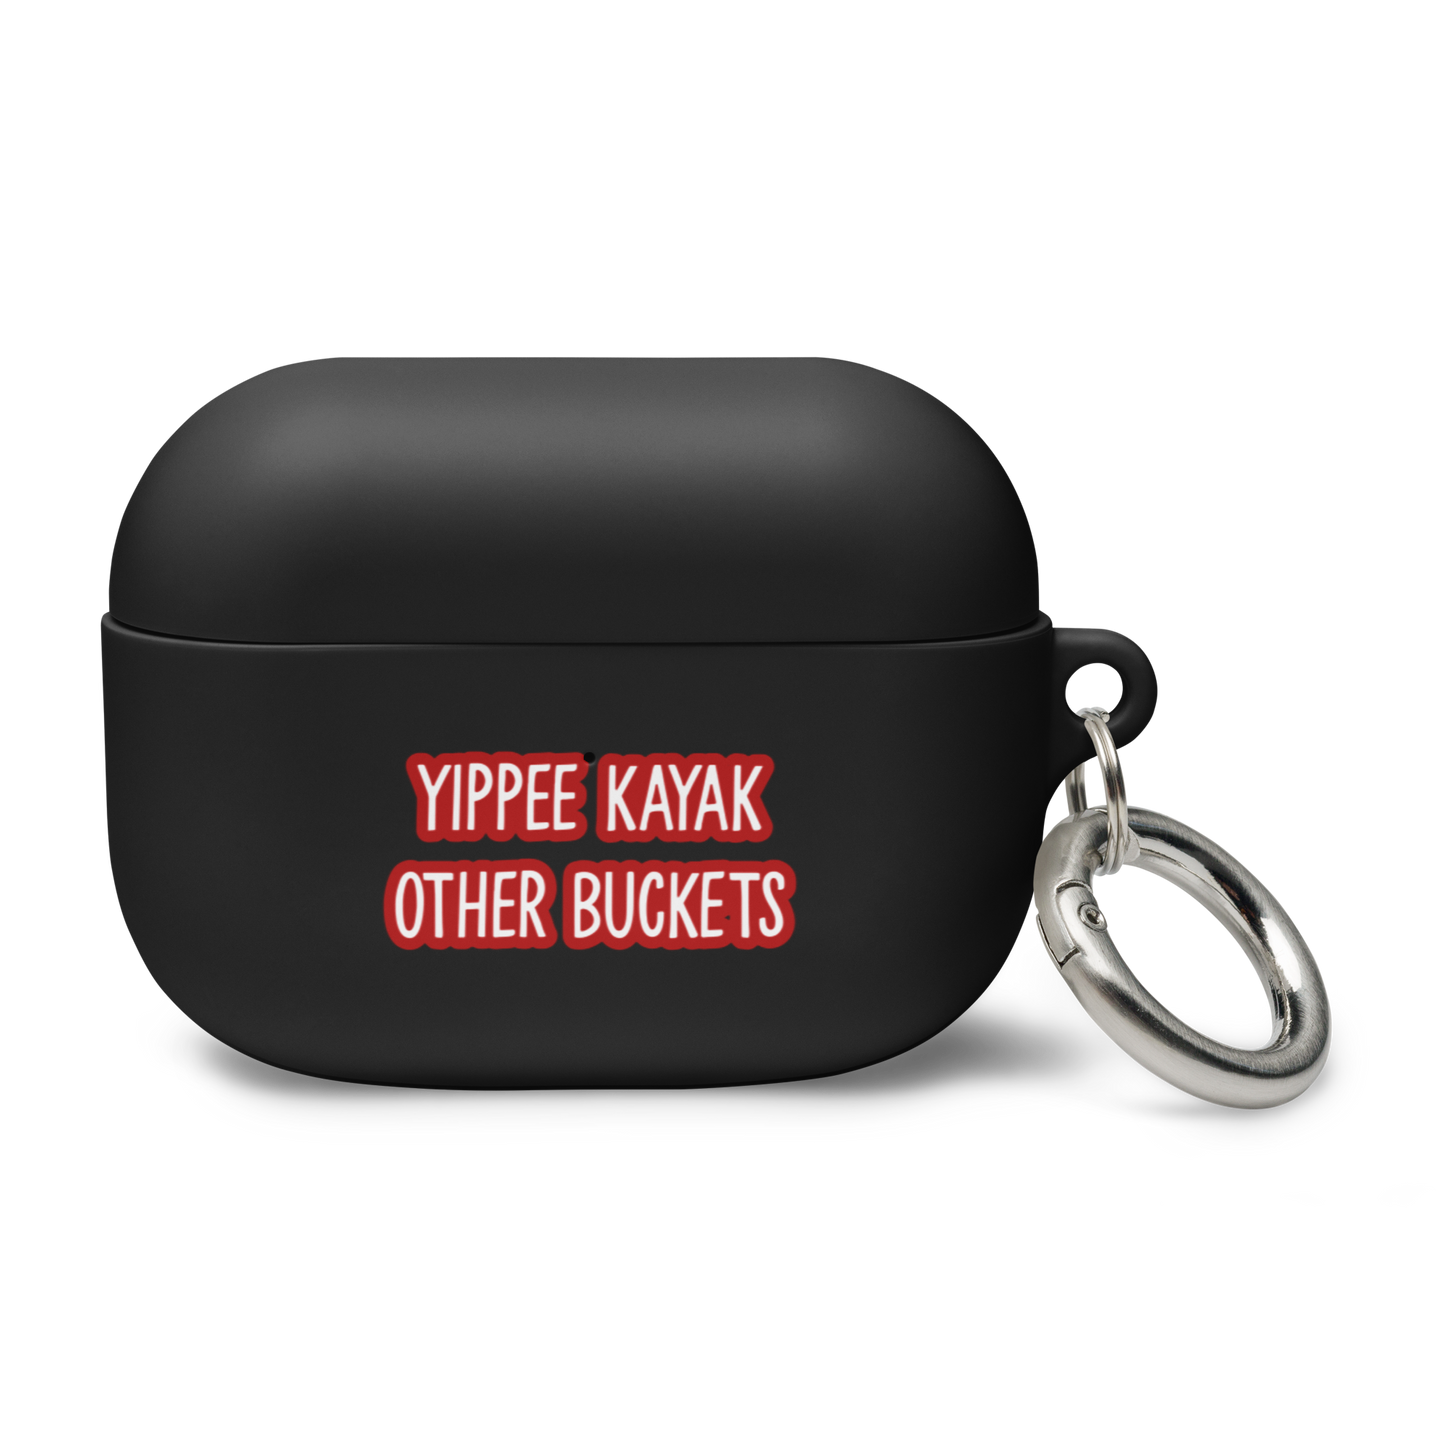 Yippee Kayak Other Buckets Rubber Case for AirPods®